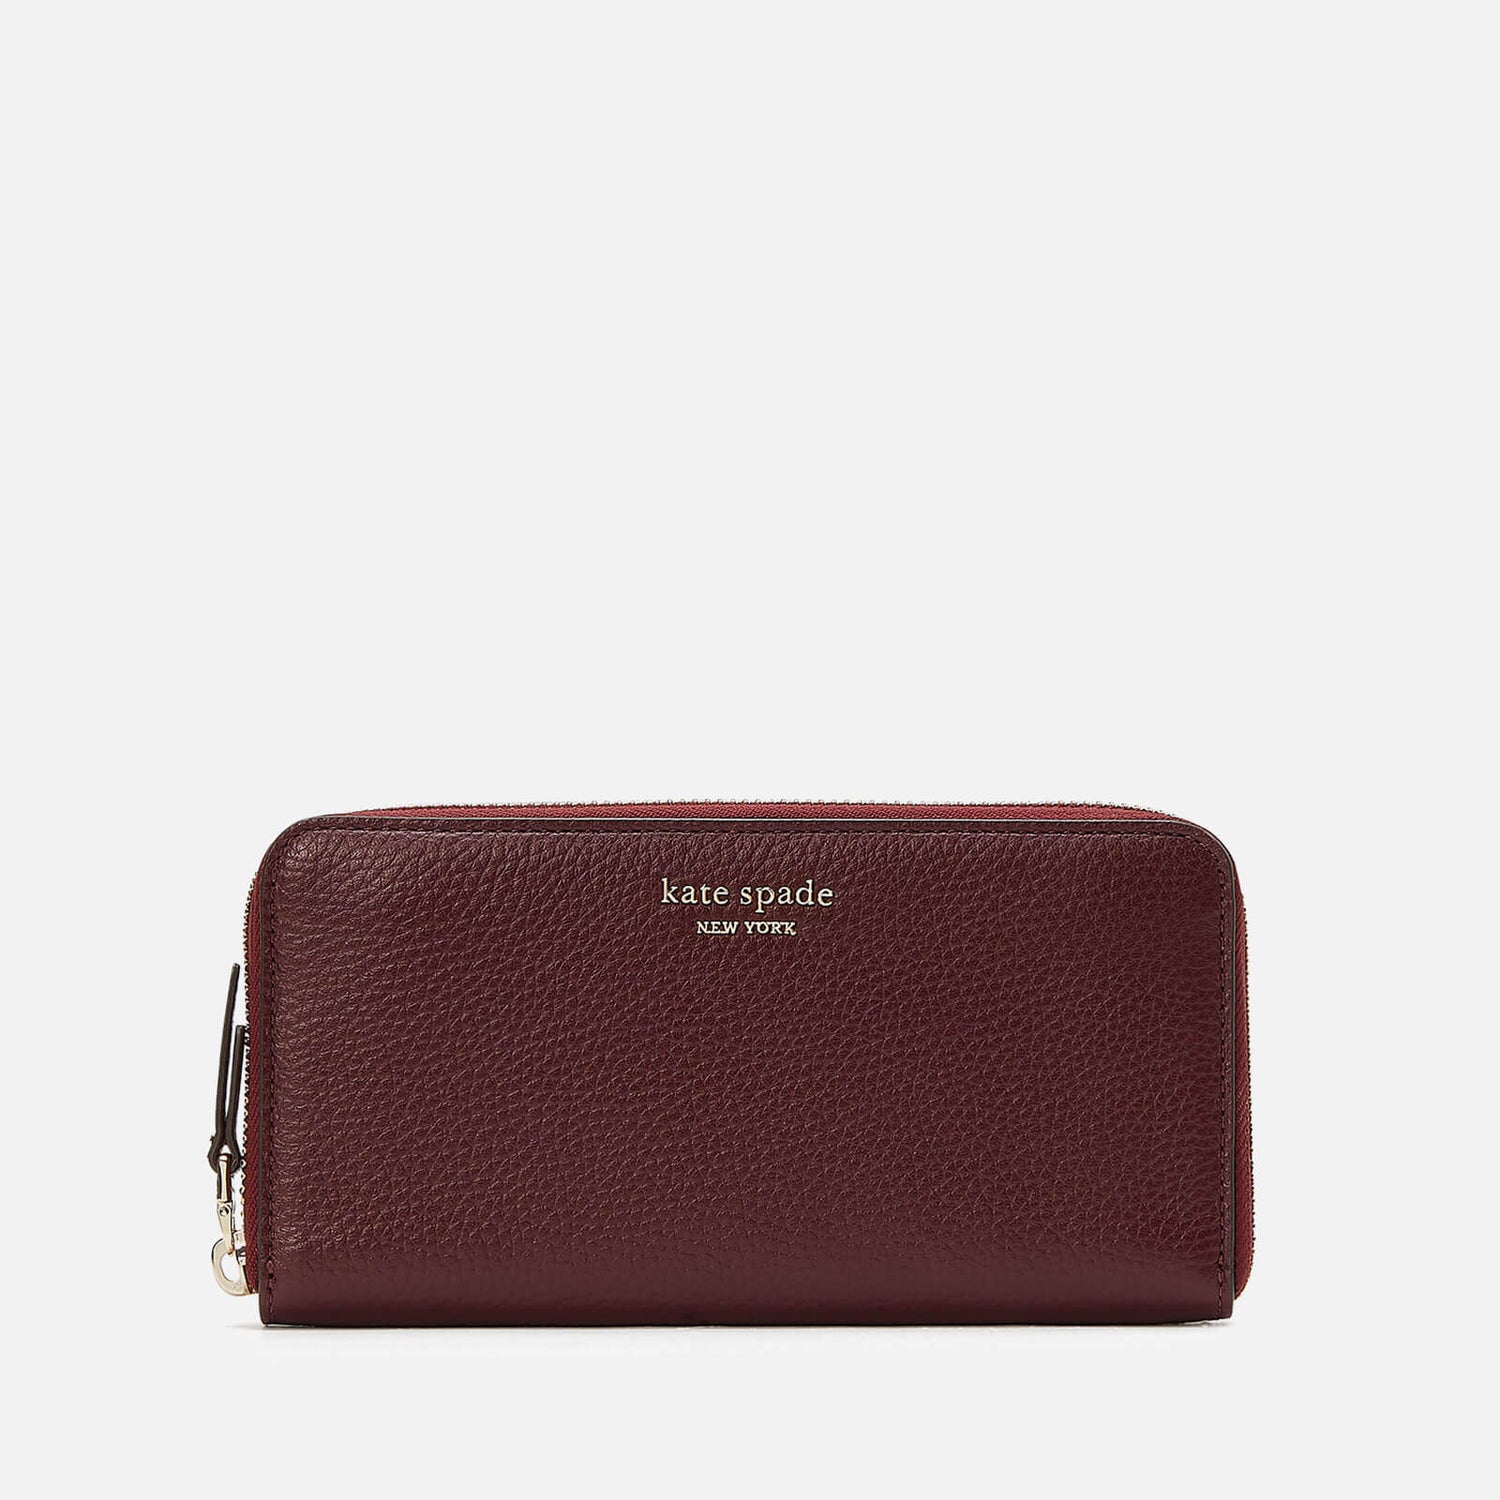 Kate Spade New York Veronica Pebbled Leather Wallet